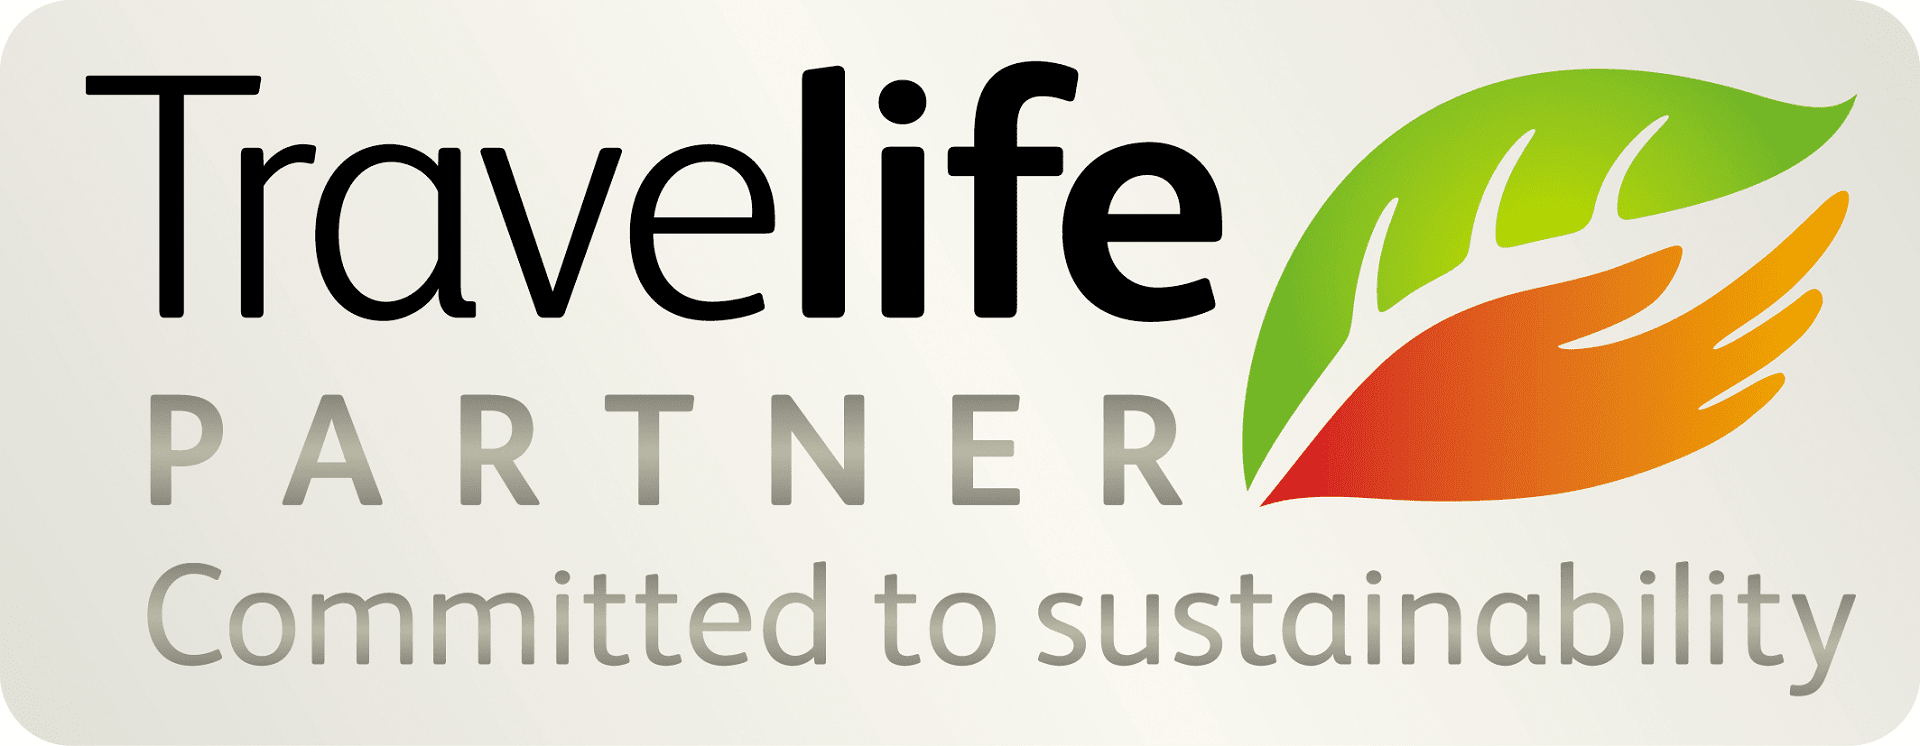 RESPONSible Travel Peru is Travelife partner and very committed to sustainability in tourism.